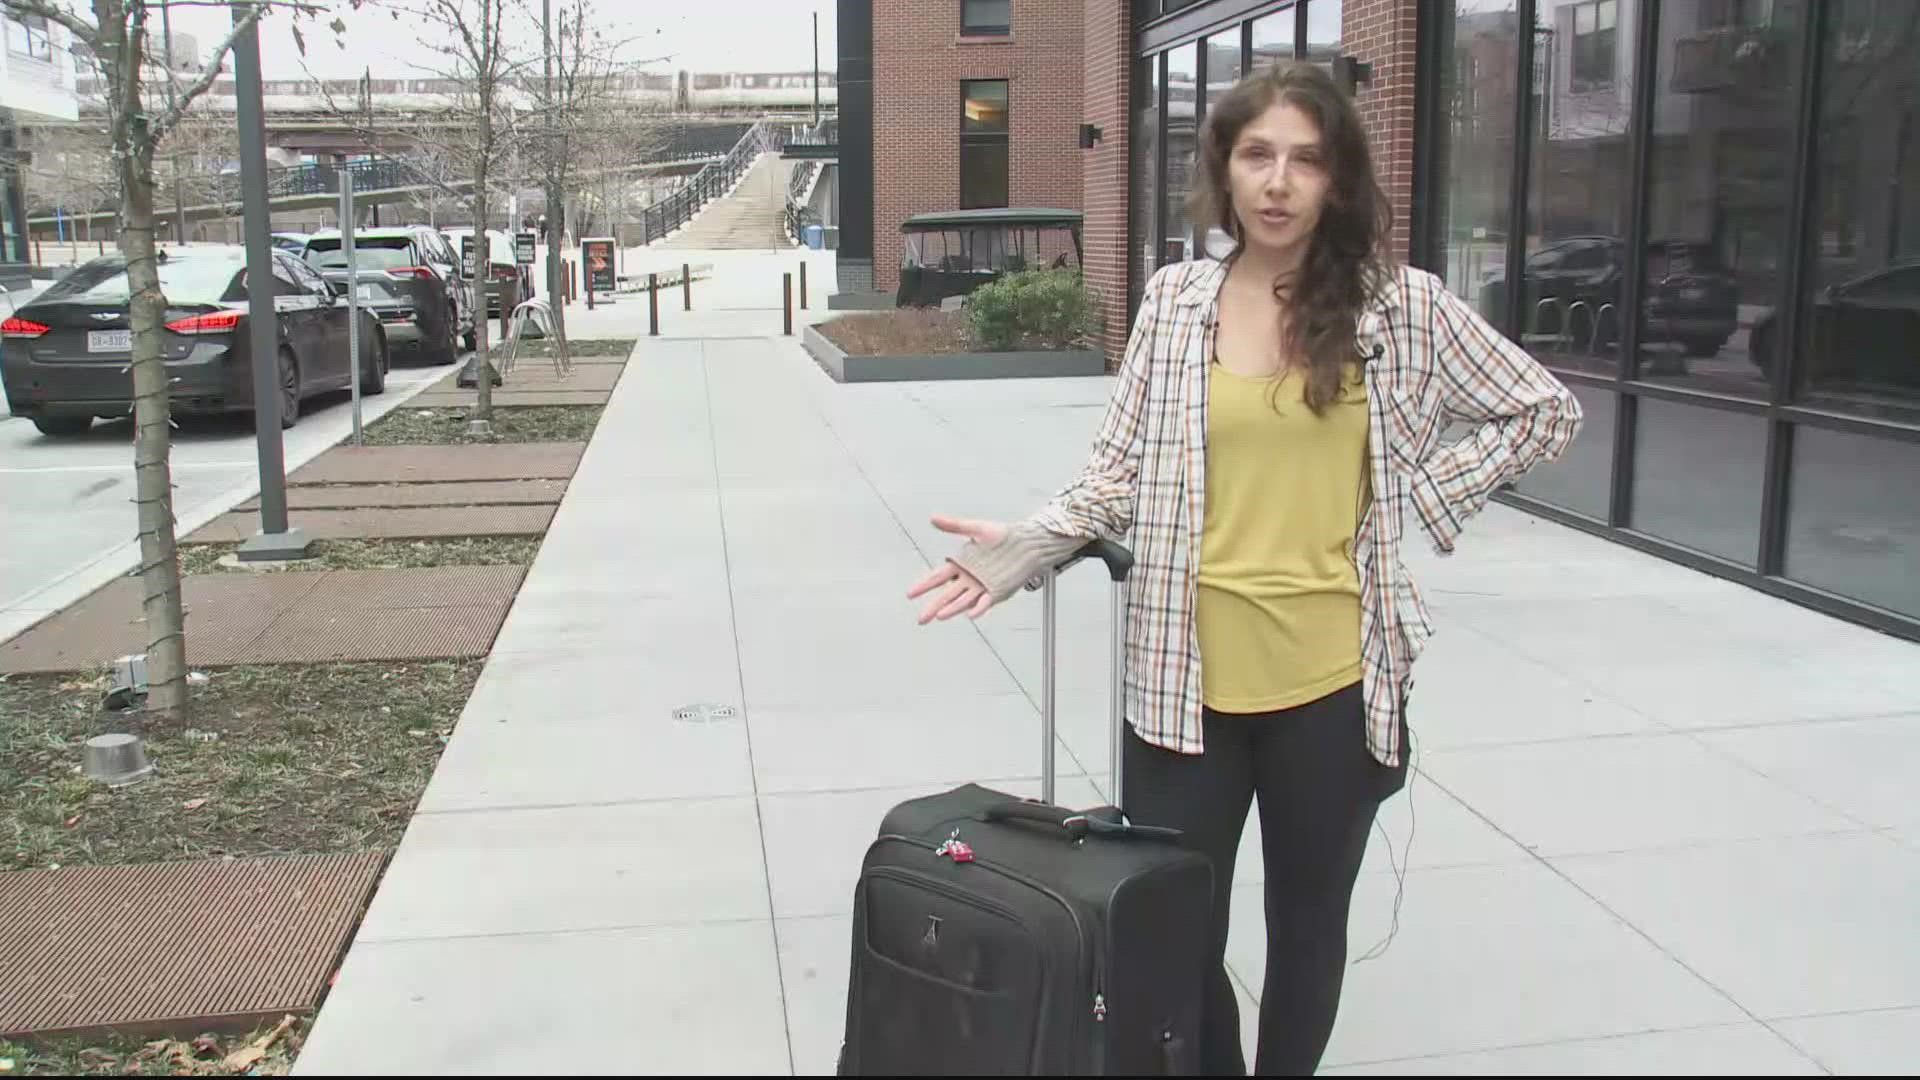 A DC resident is accusing United Airlines of lying and gaslighting after she went to extraordinary extremes to track down some lost luggage during the holiday trave